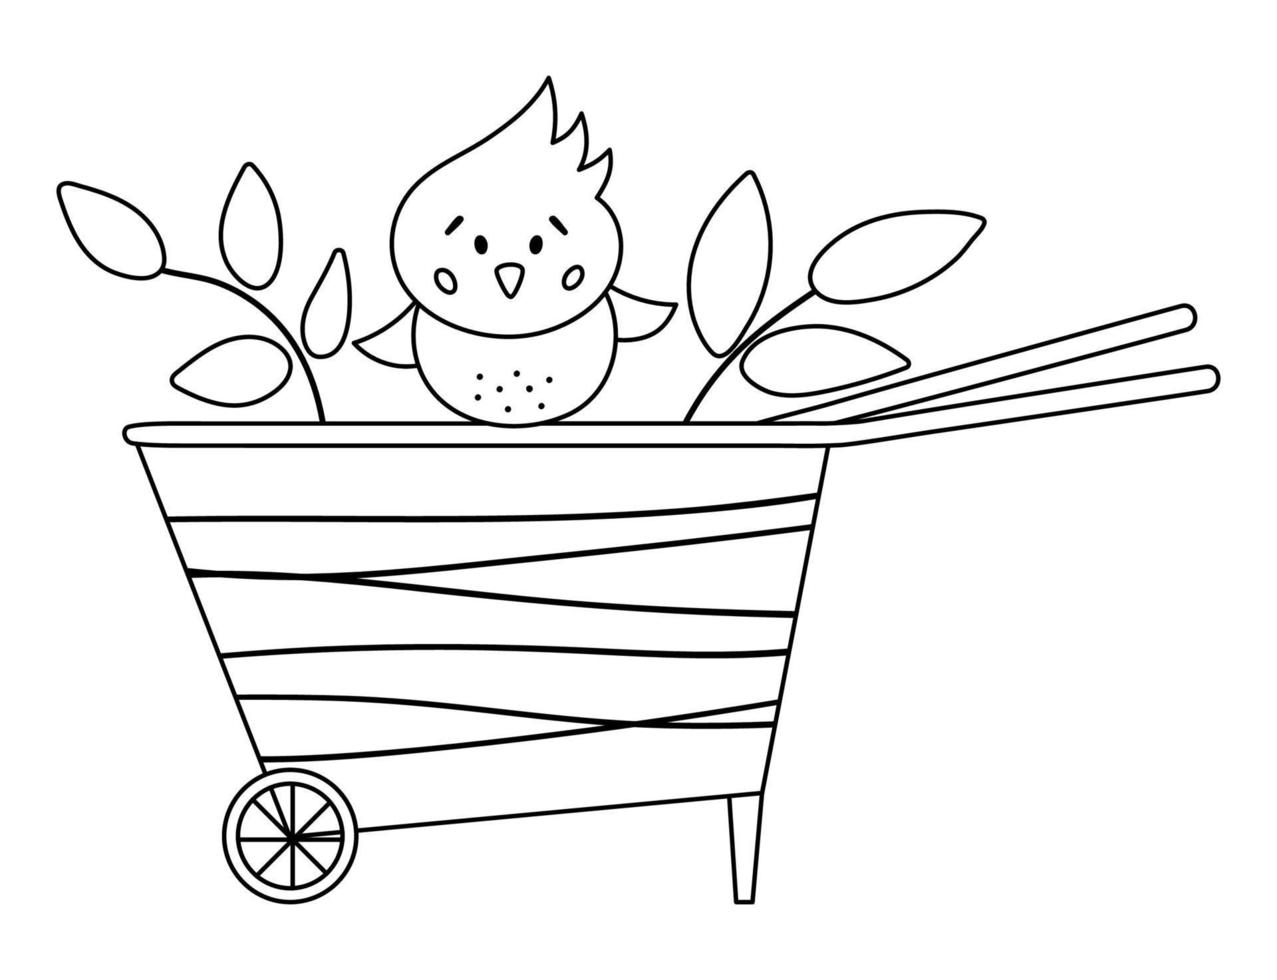 Vector cute black and white wheel barrow with chick icon isolated on white background. Outline spring garden tool illustration or coloring page. Funny gardening equipment picture for kids.